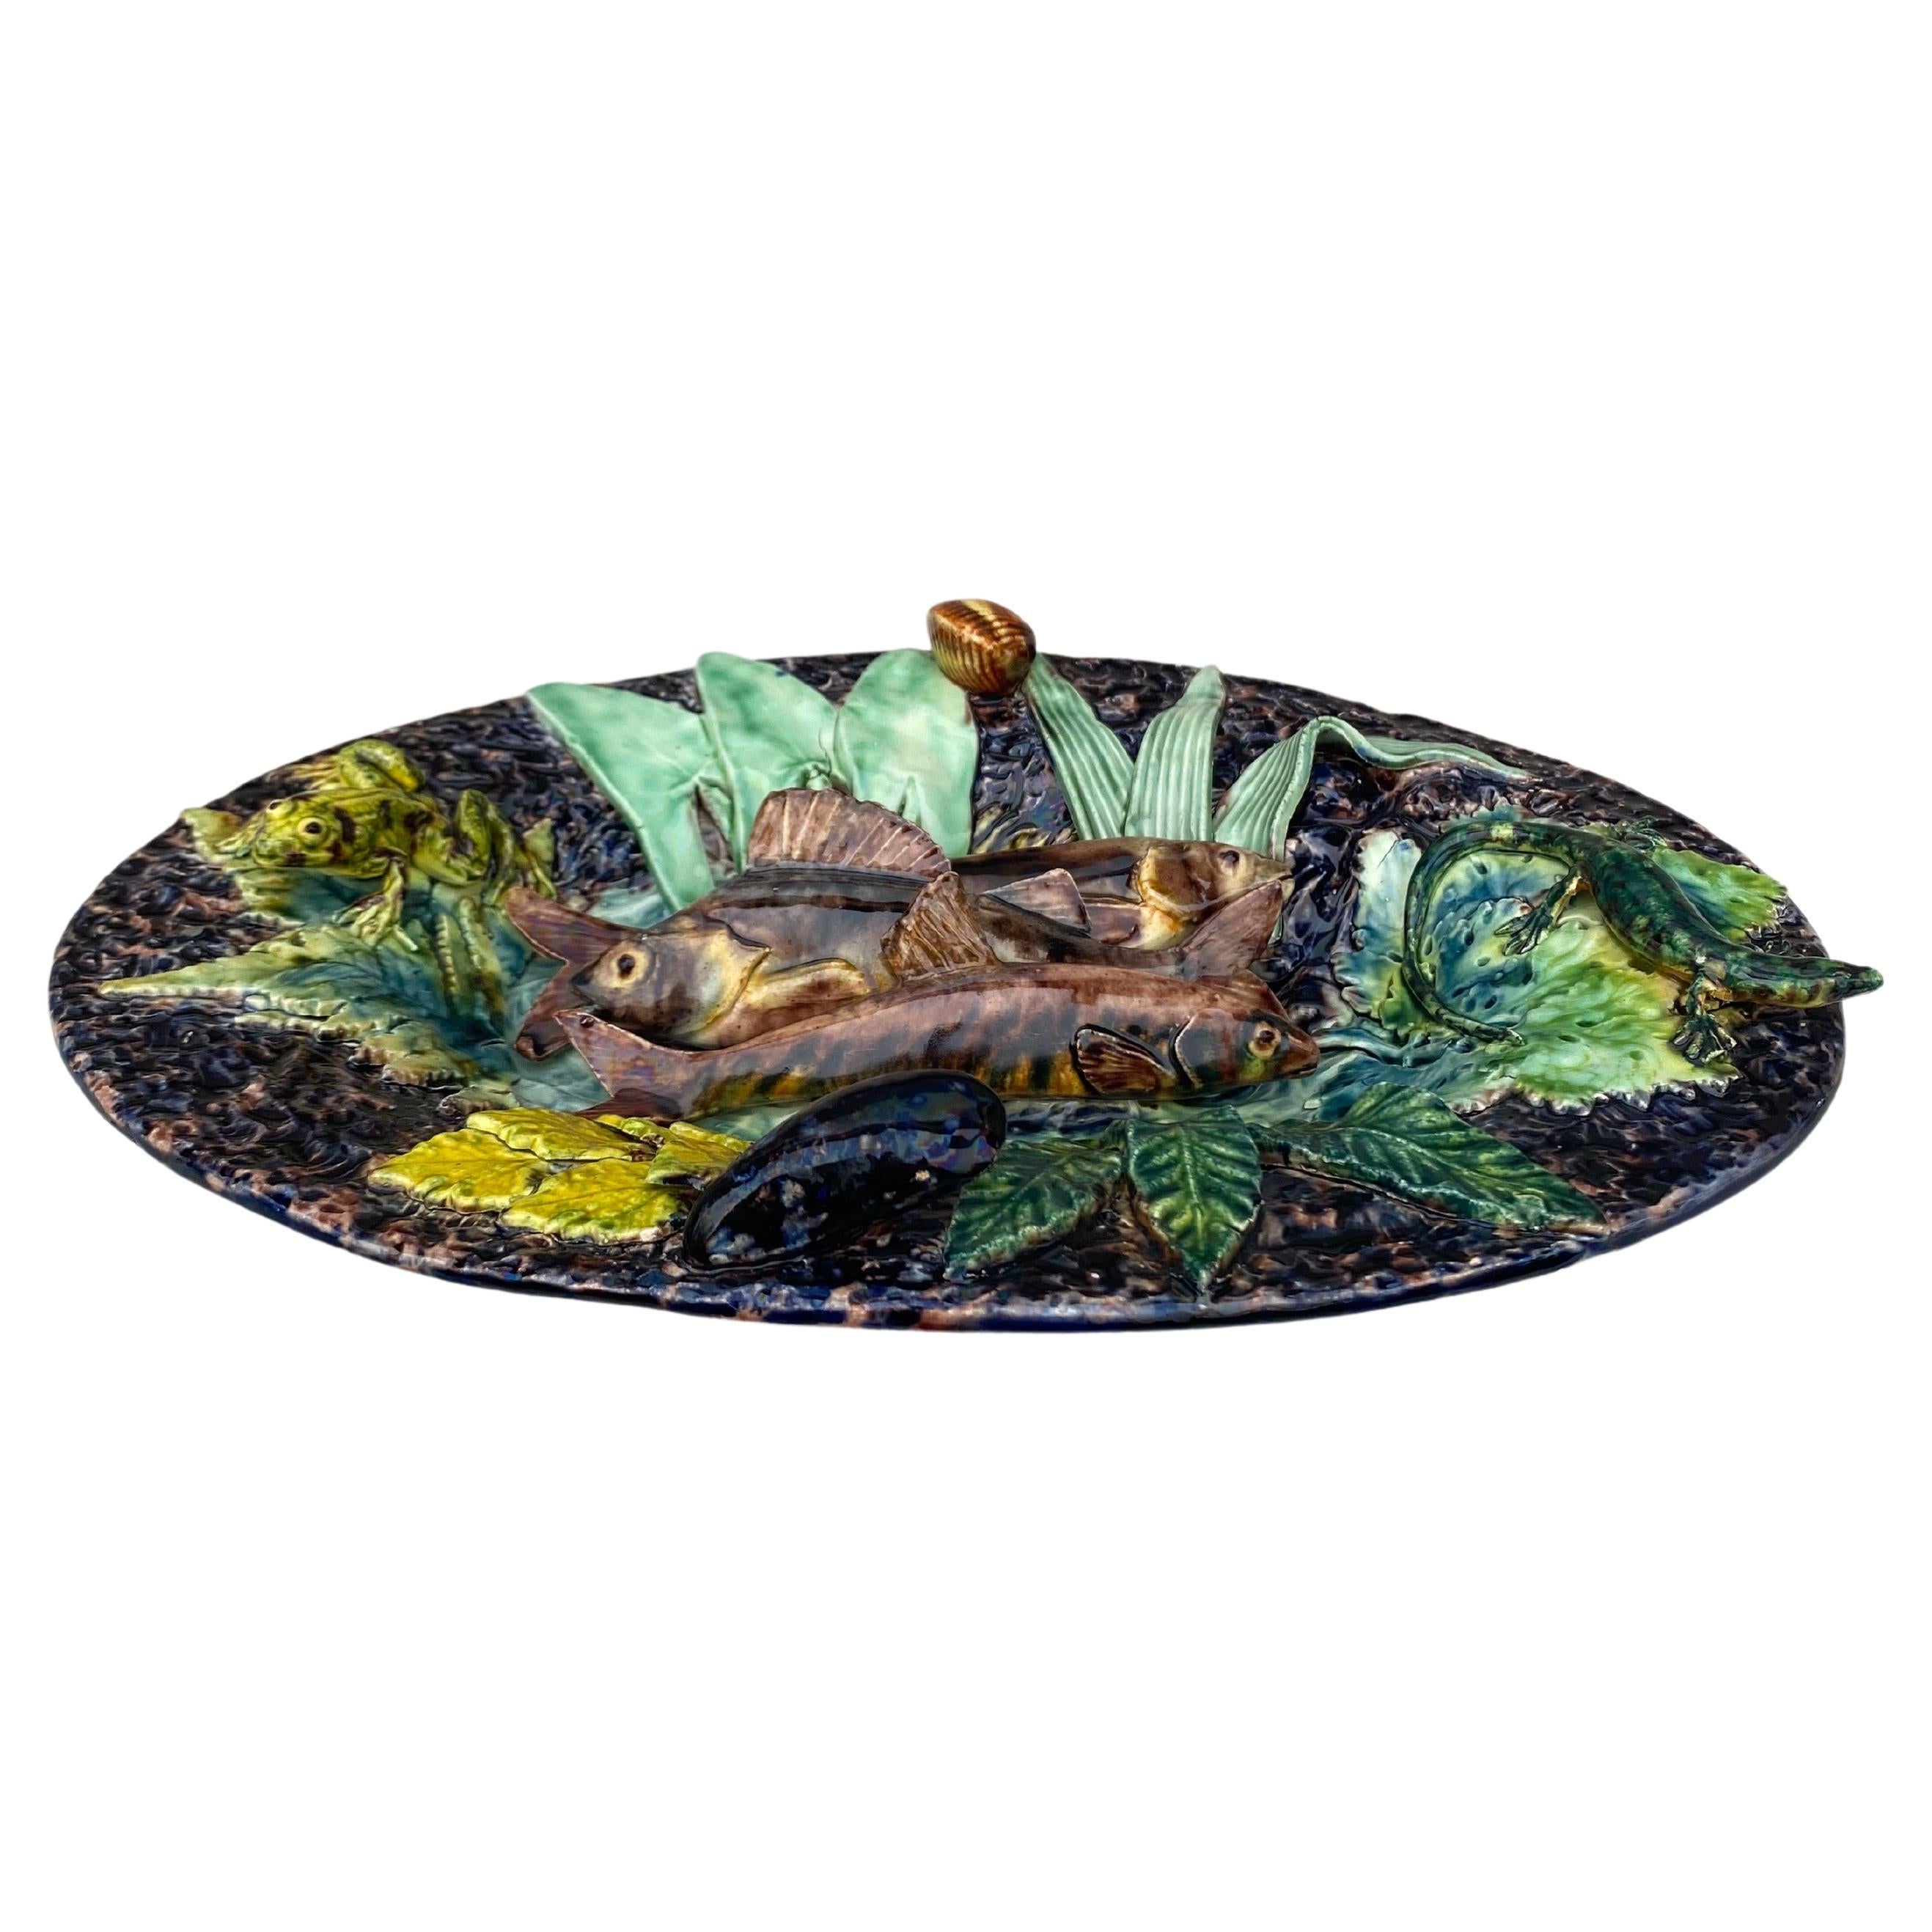 19th Century Majolica Palissy Fishs platter signed Thomas Sergent.
Fishs, Frog, Lizard, mussel, shell.